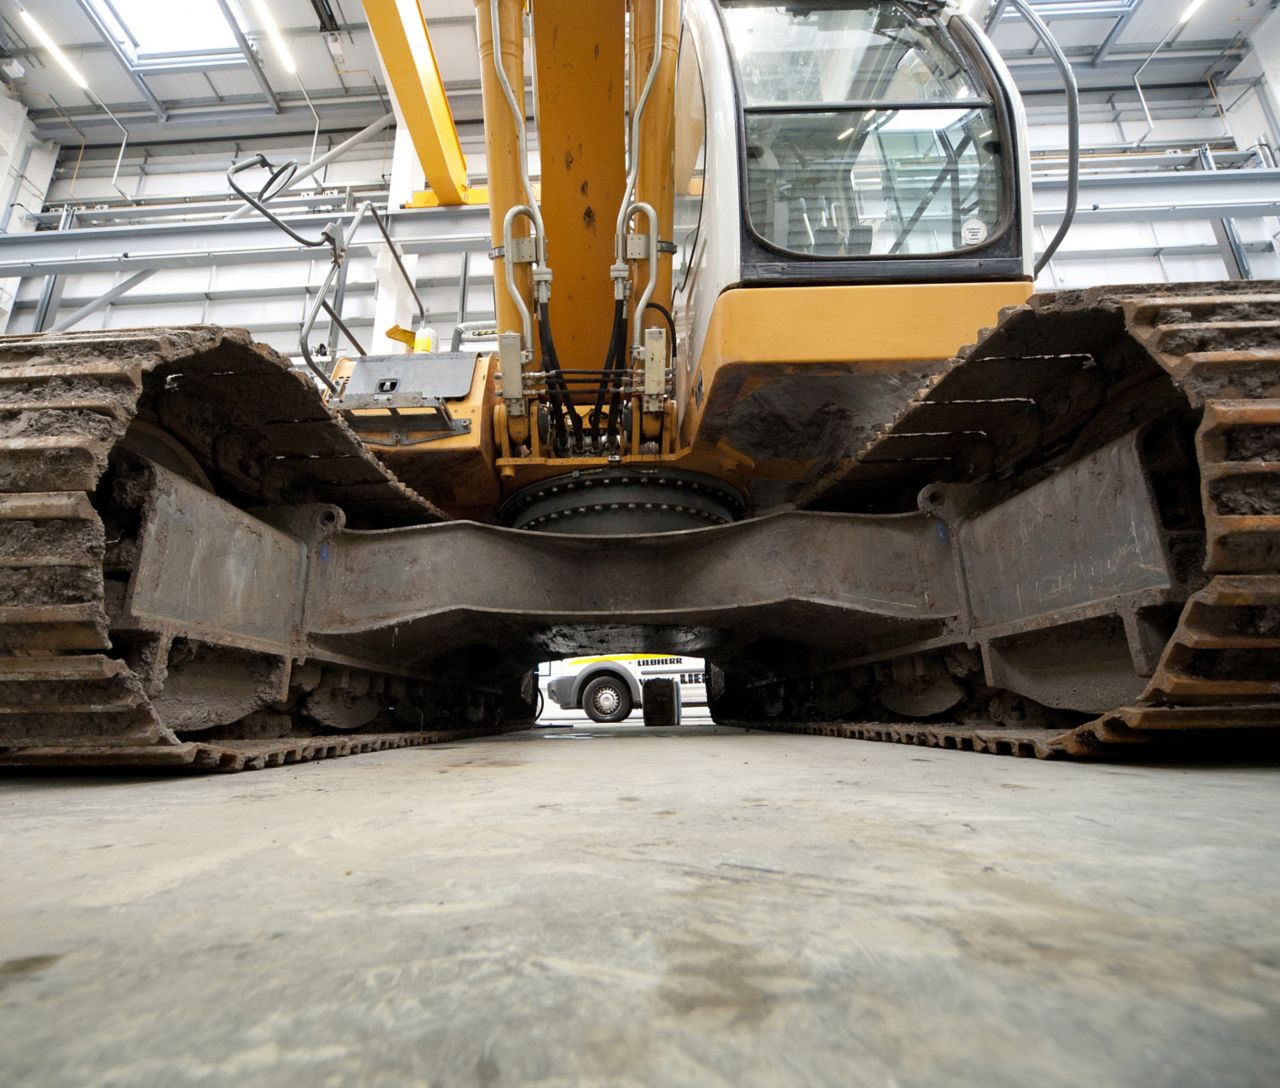 Excavator standing on heavy duty cementitious floor in warehouse